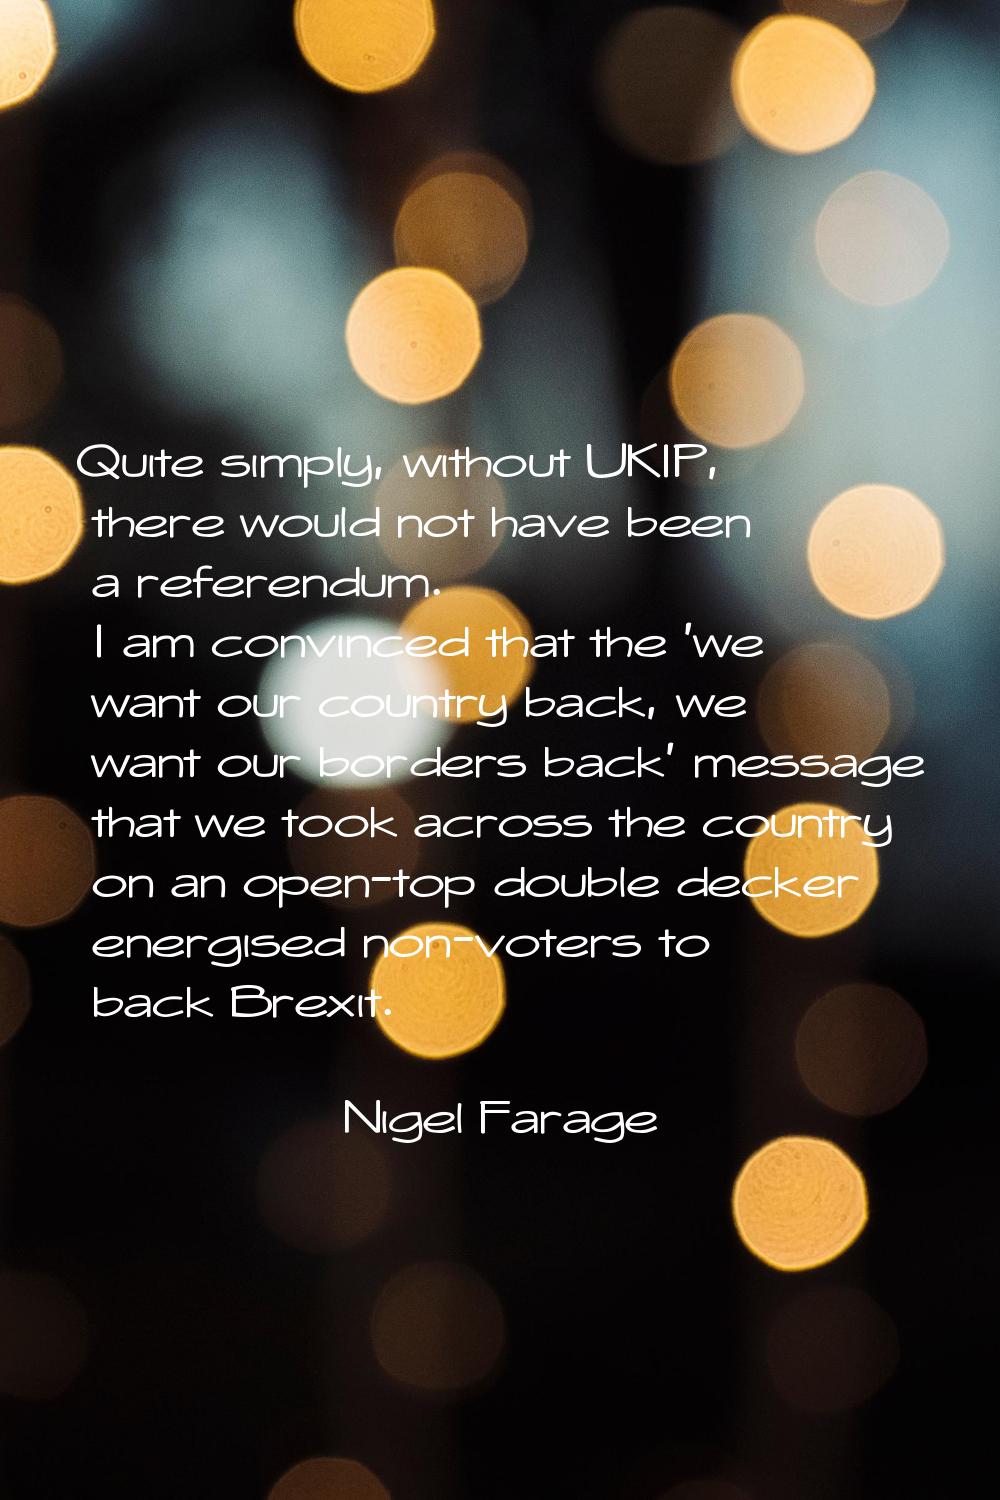 Quite simply, without UKIP, there would not have been a referendum. I am convinced that the 'we wan